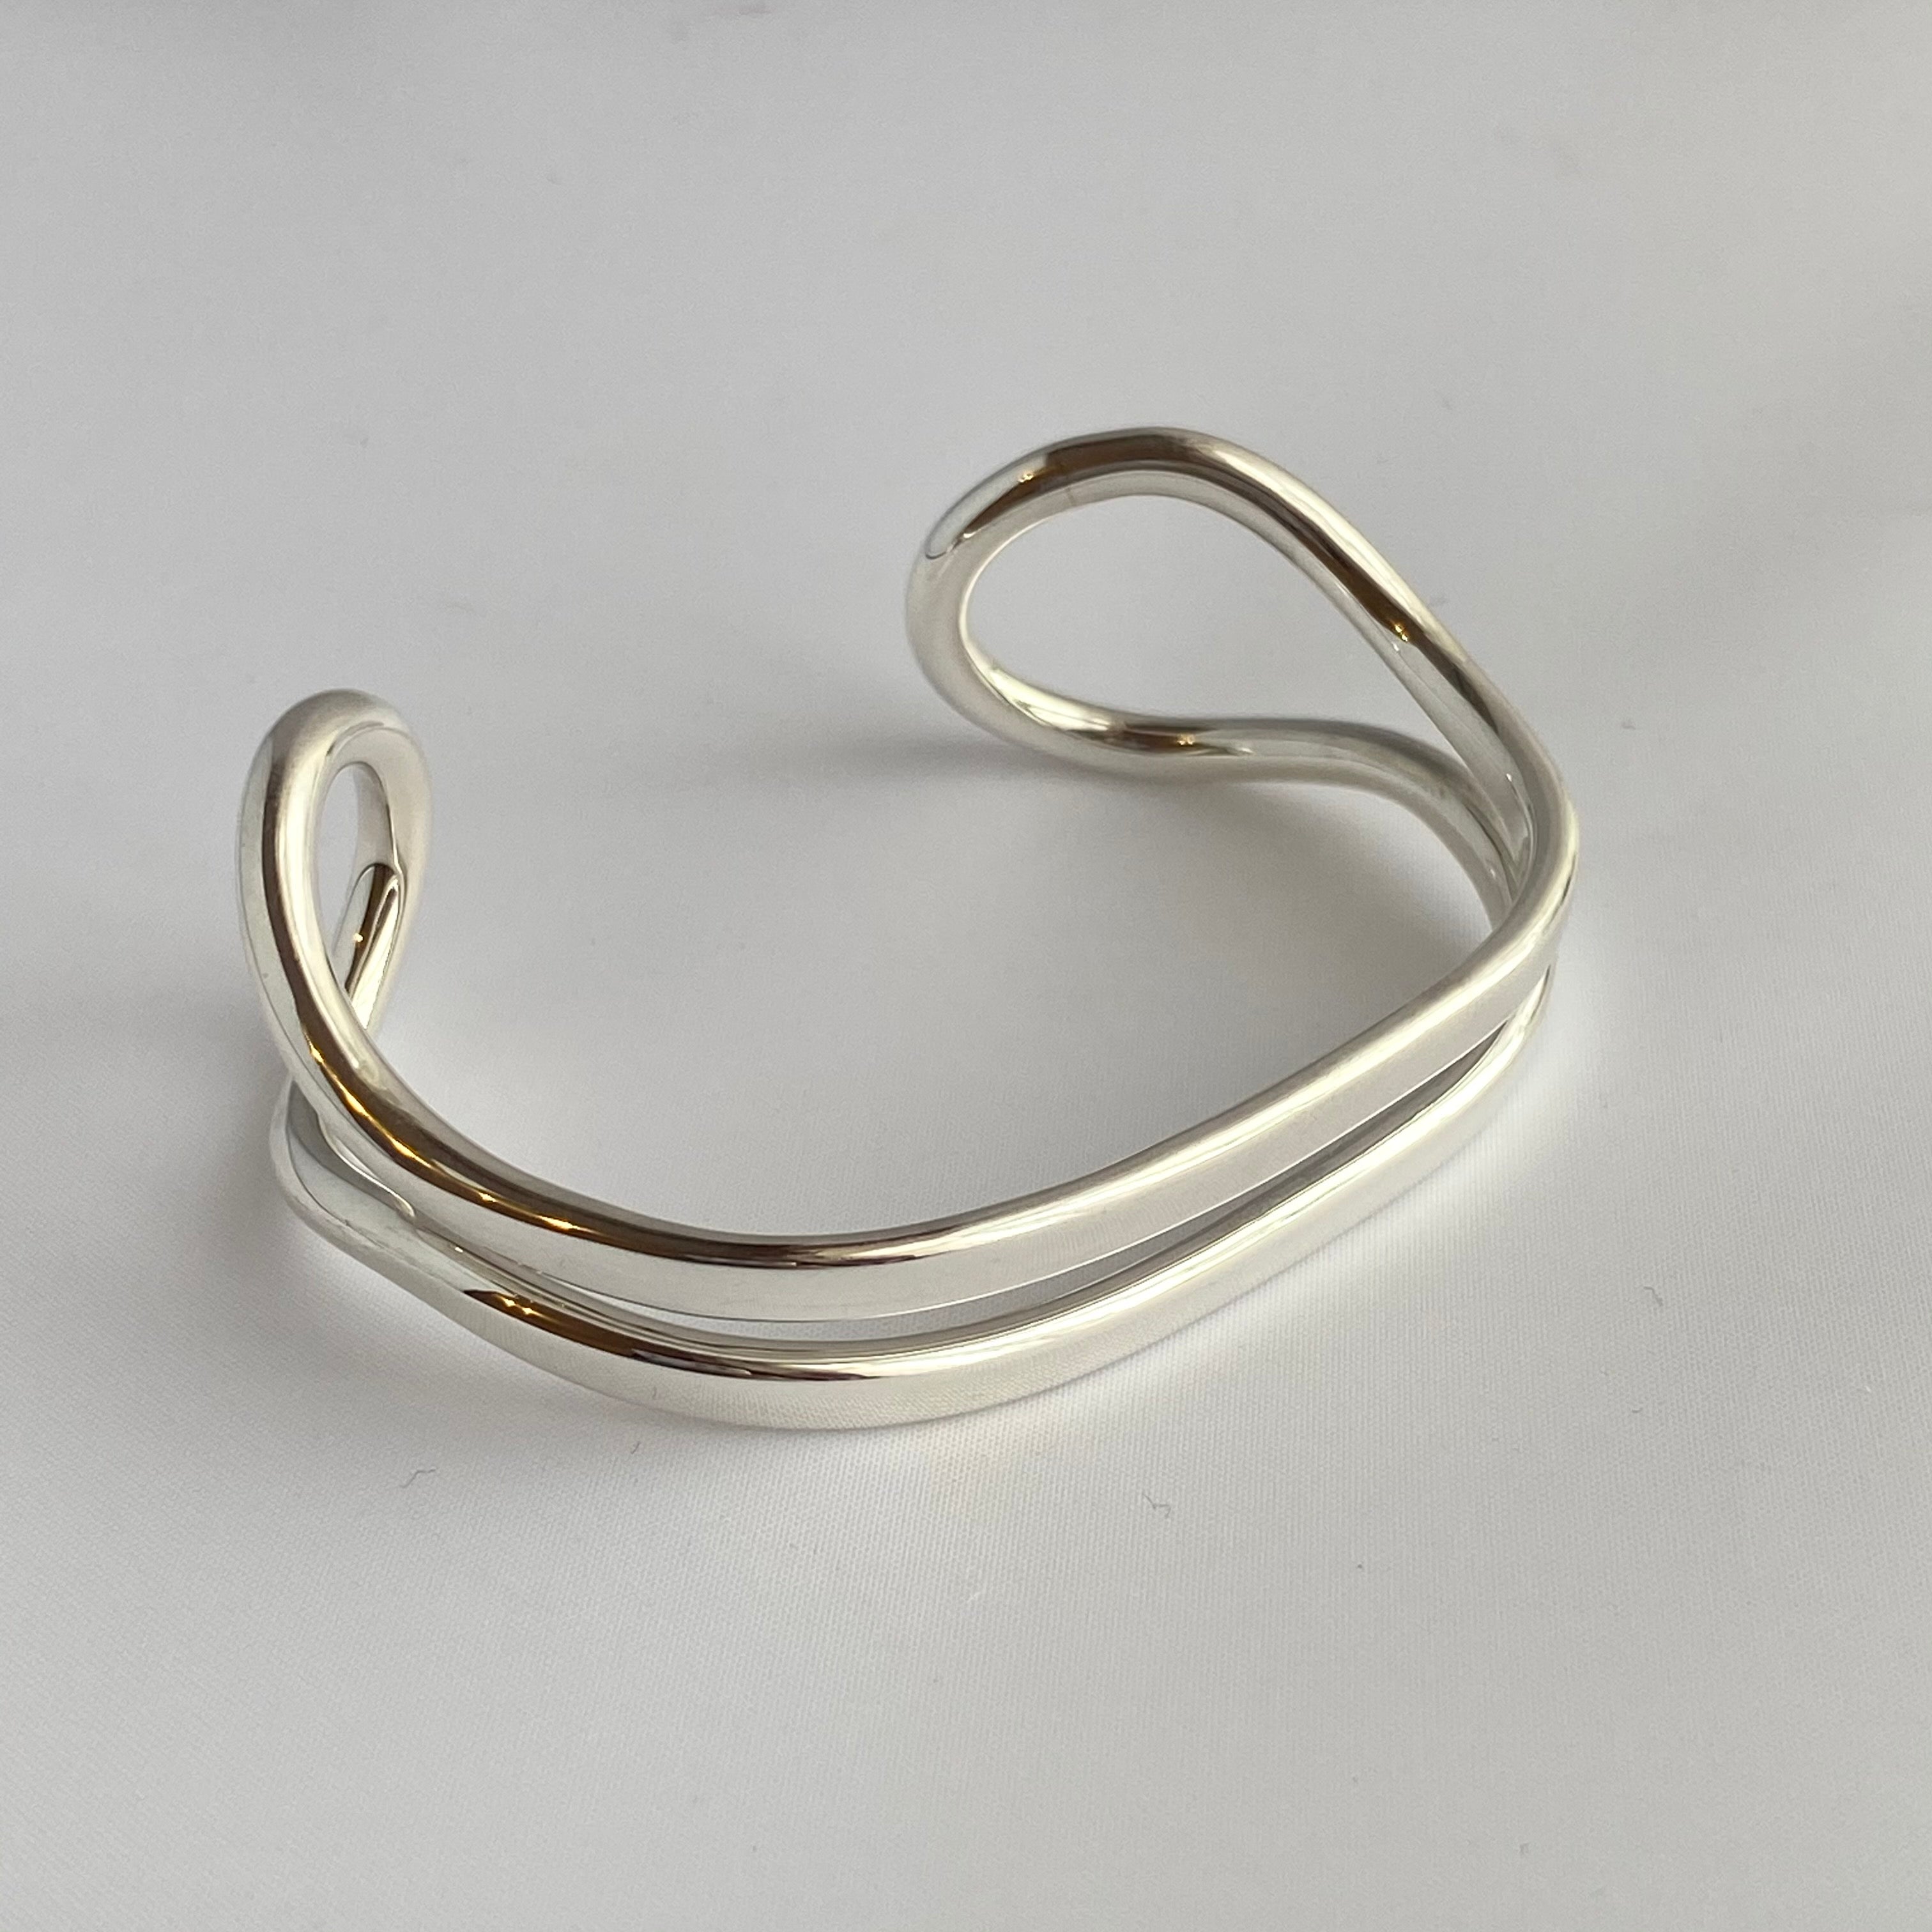 Sterling Silver Cuff with Two Flat Curving Silver Bands